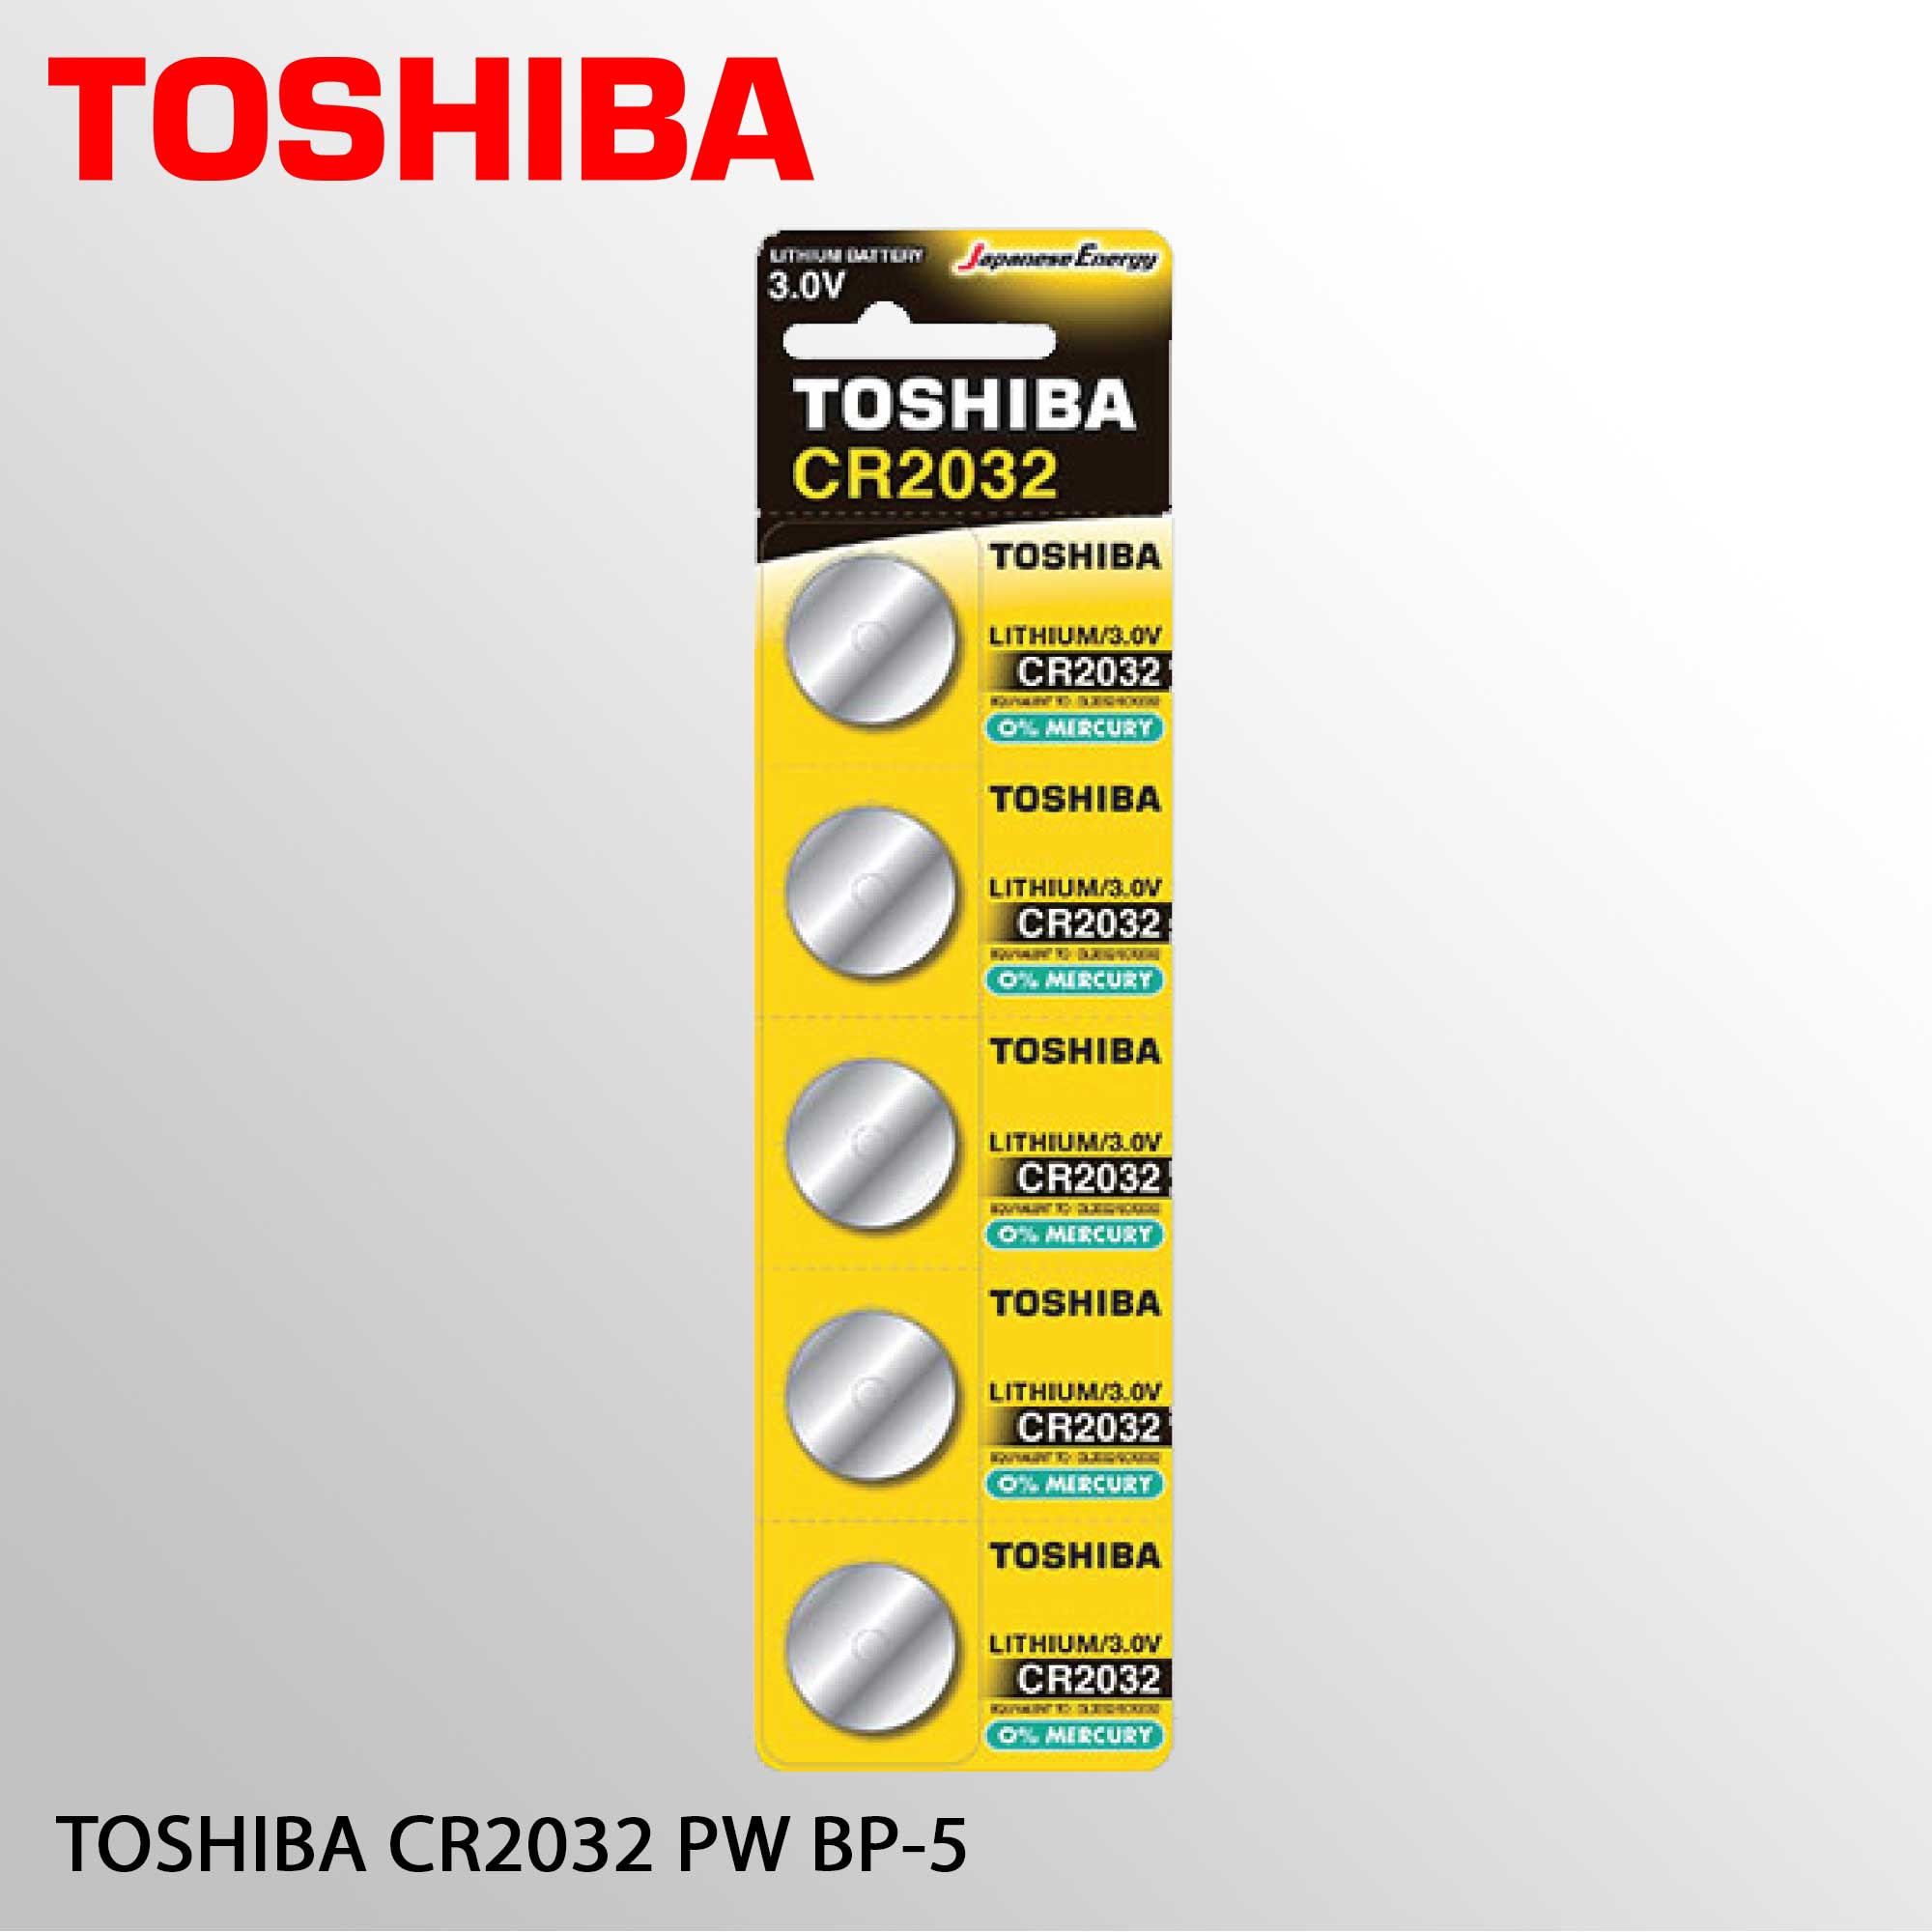 TOSHIBA CR2025 PW BP-5 PACK Of 5